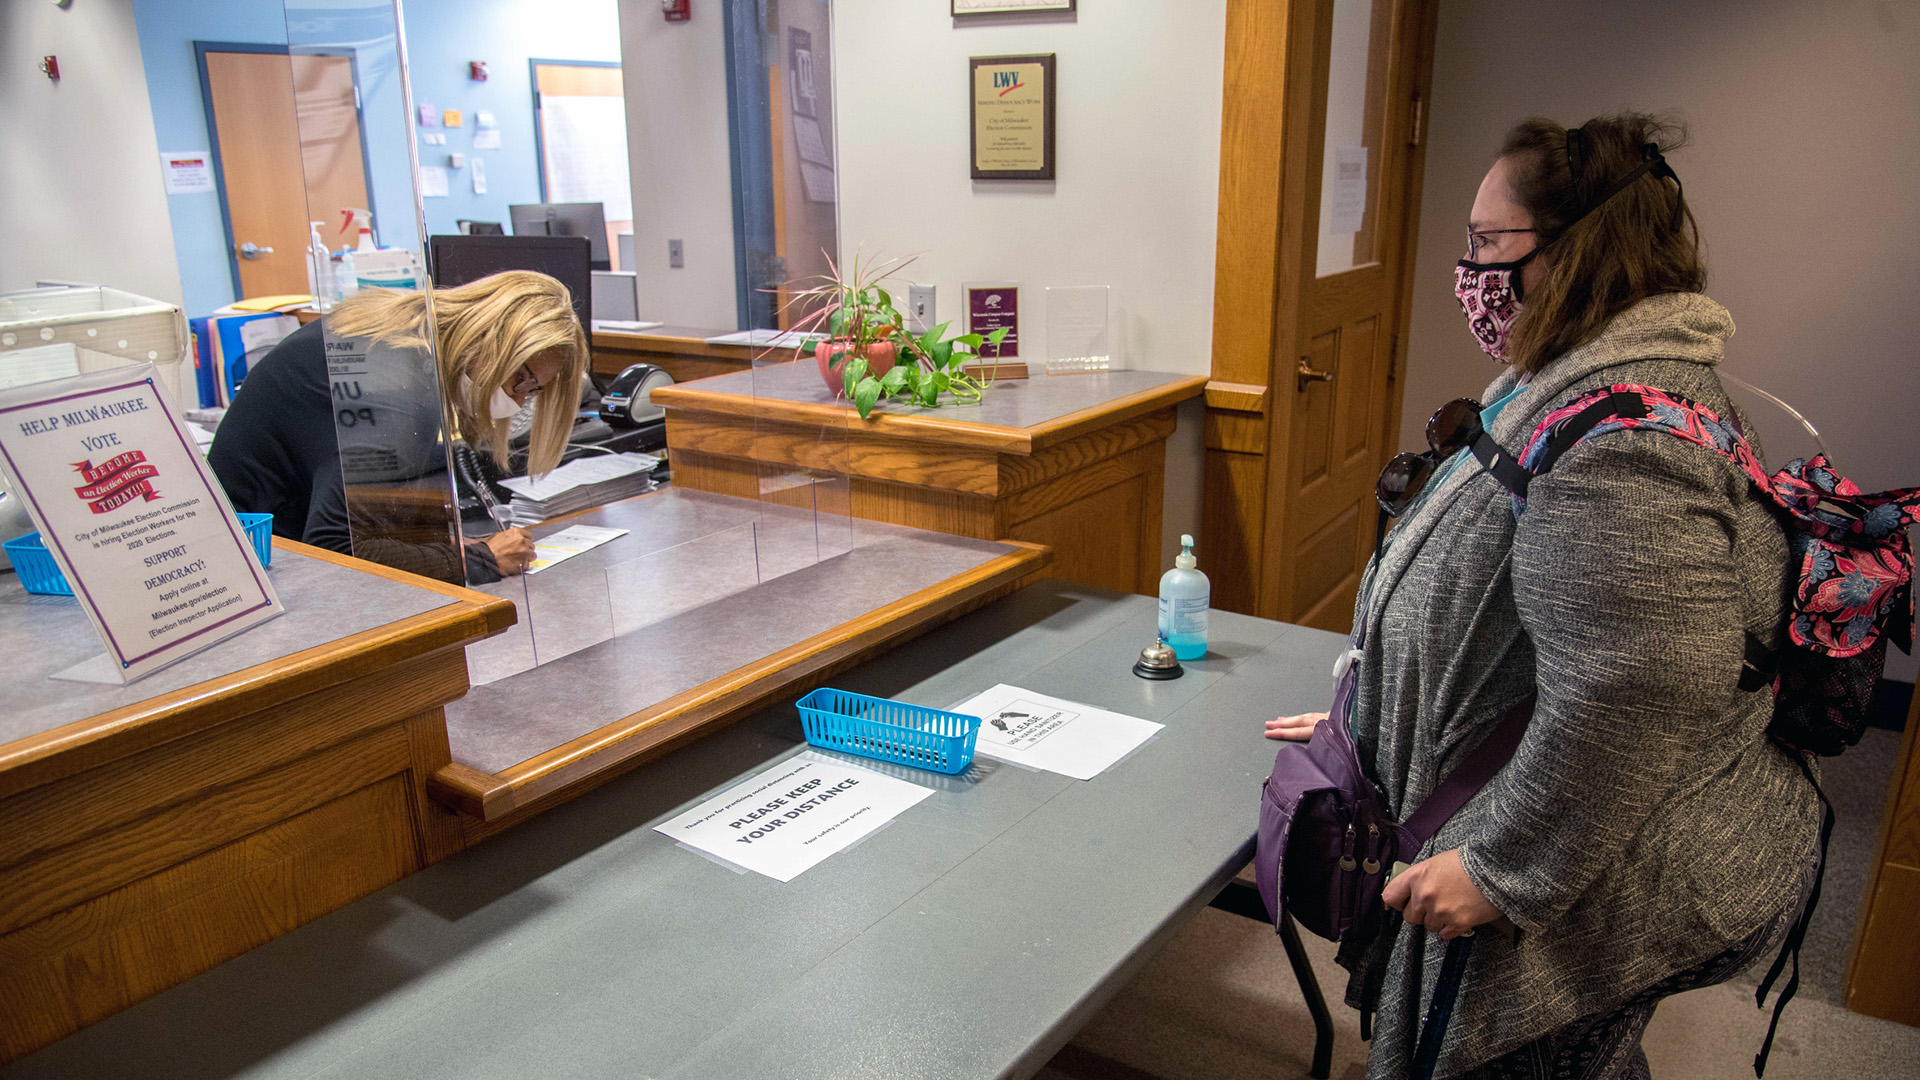 An elections worker standing behind a service counter in an office leans over and signs a ballot envelope form while Lee Ann Media watches from across a table.